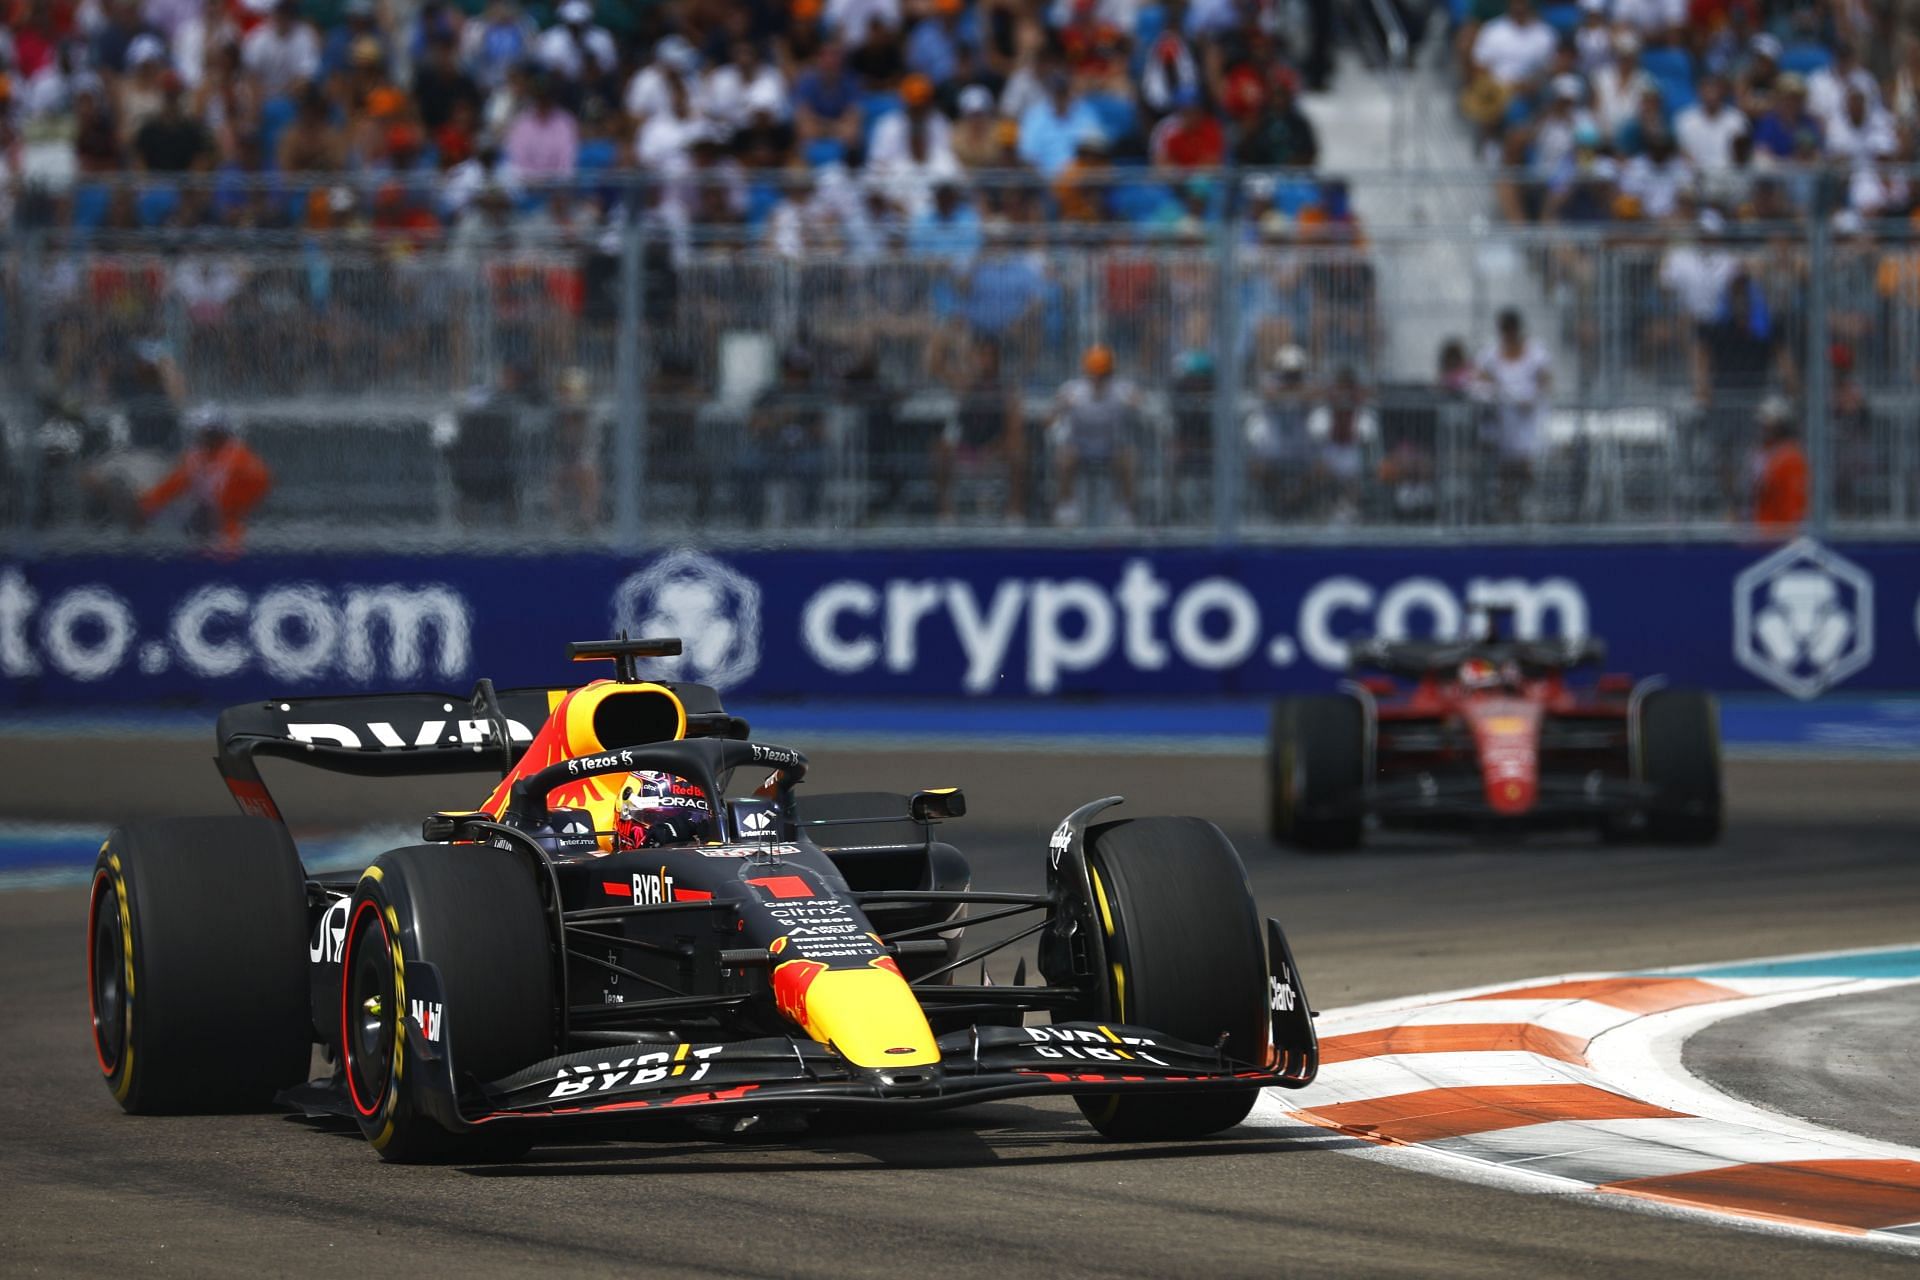 Max Verstappen (foreground) and Charles Leclerc (background) in action during the 2022 F1 Miami GP. (Photo by Jared C. Tilton/Getty Images)